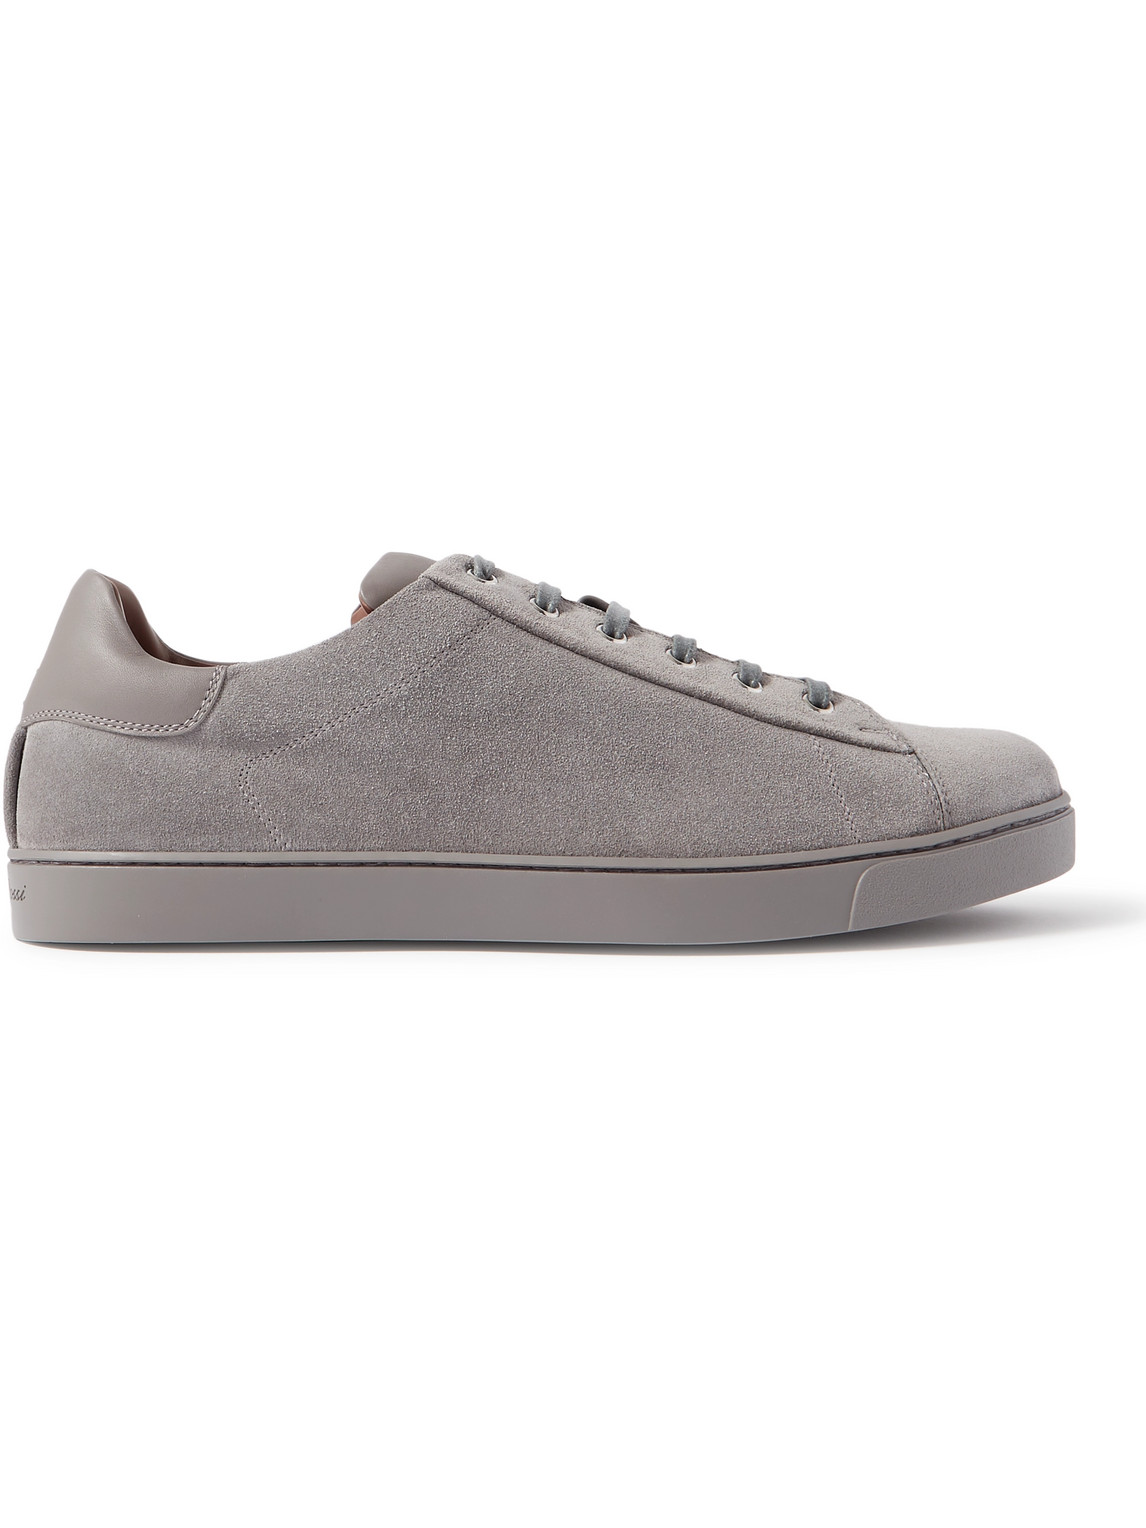 GIANVITO ROSSI LEATHER-TRIMMED SUEDE SNEAKERS